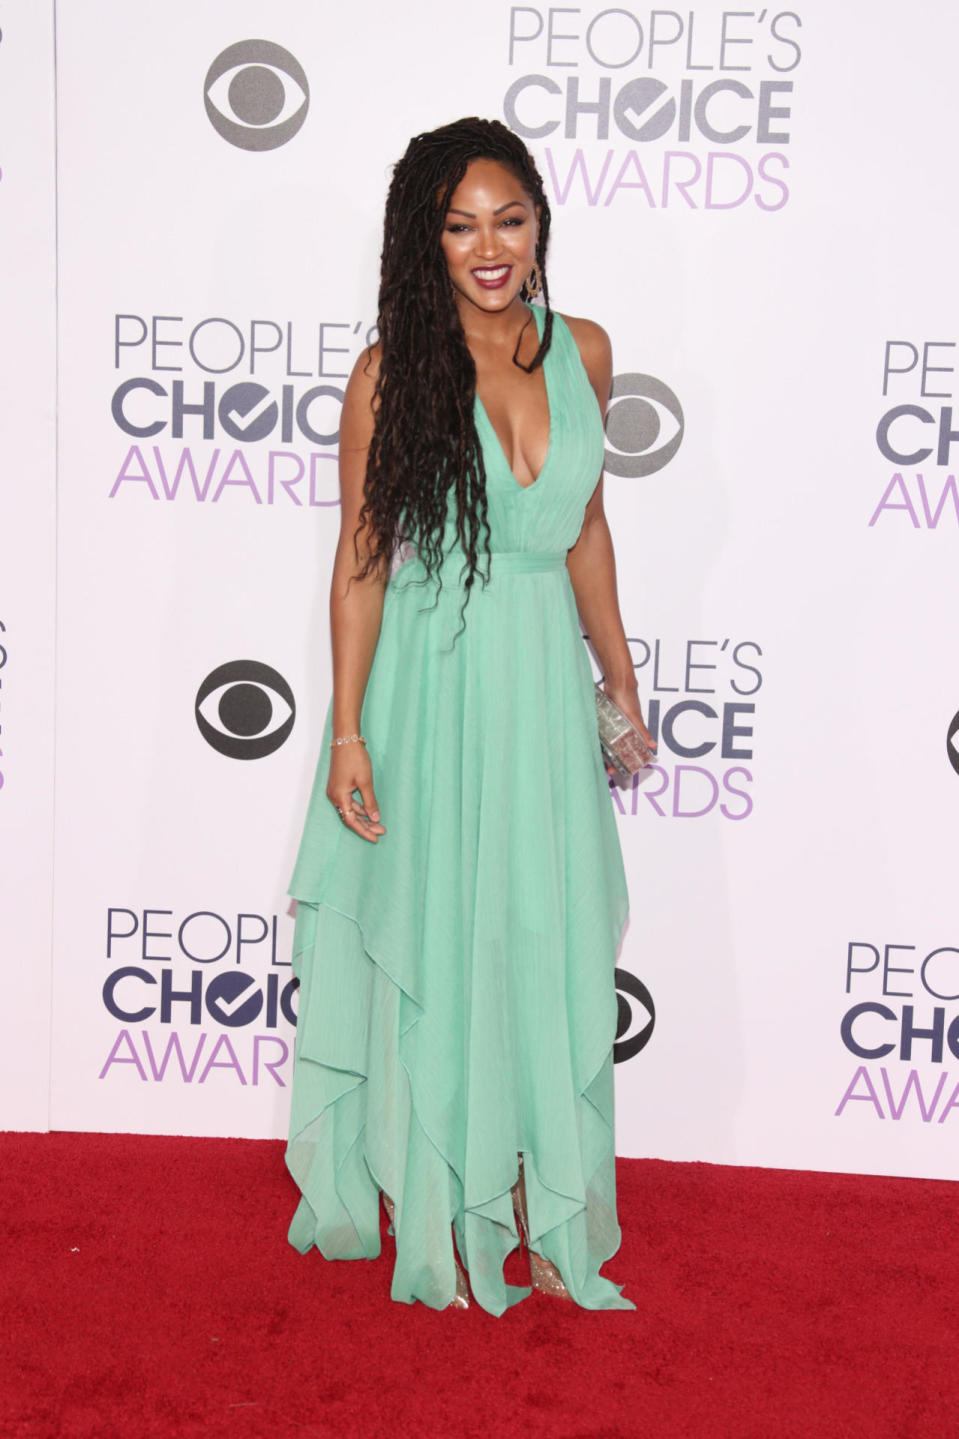 Meagan Good grinned broadly on the 2016 People’s Choice Awards red carpet